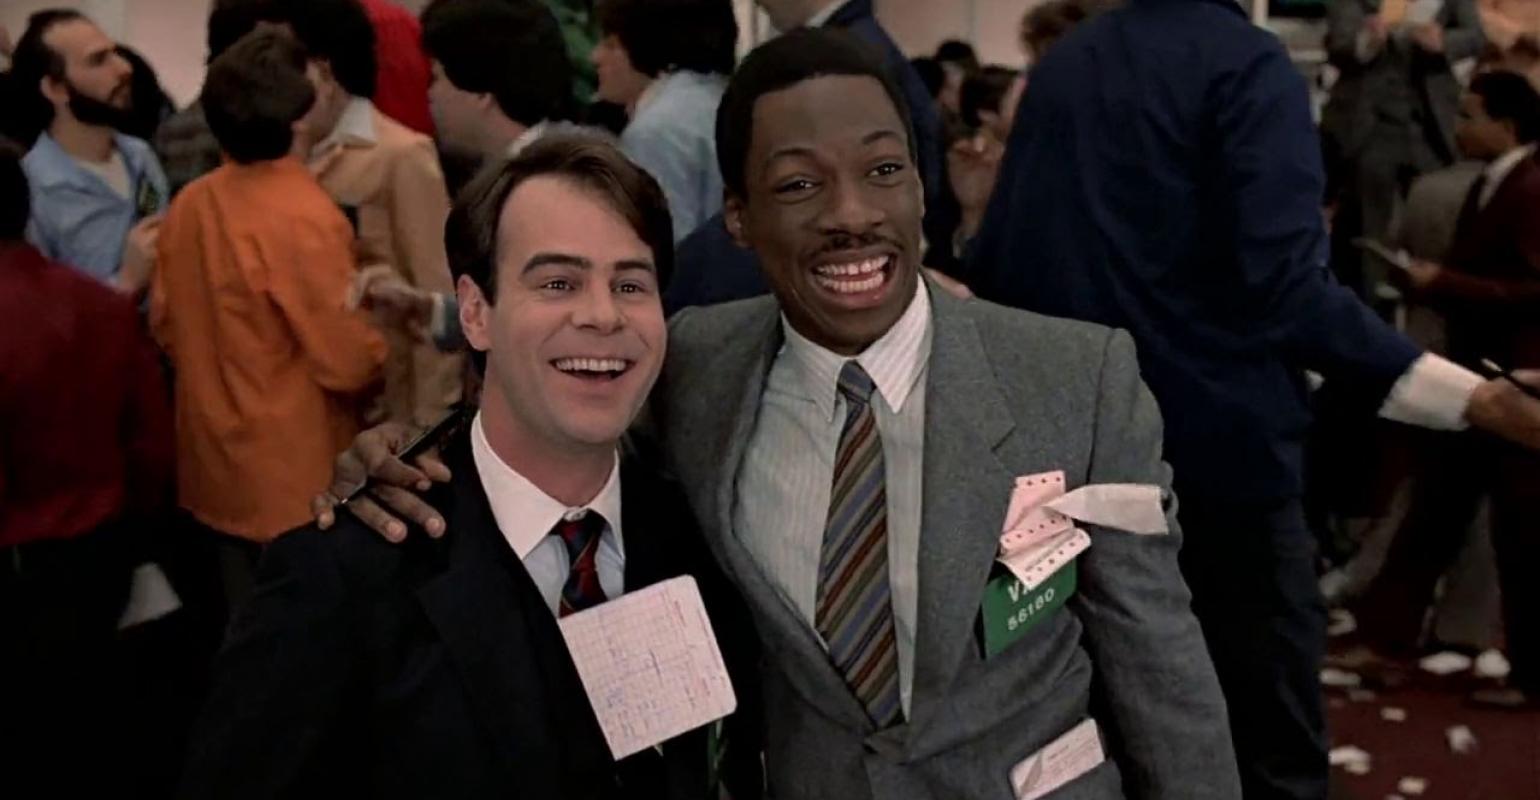 eddie murphy trading places merry new year